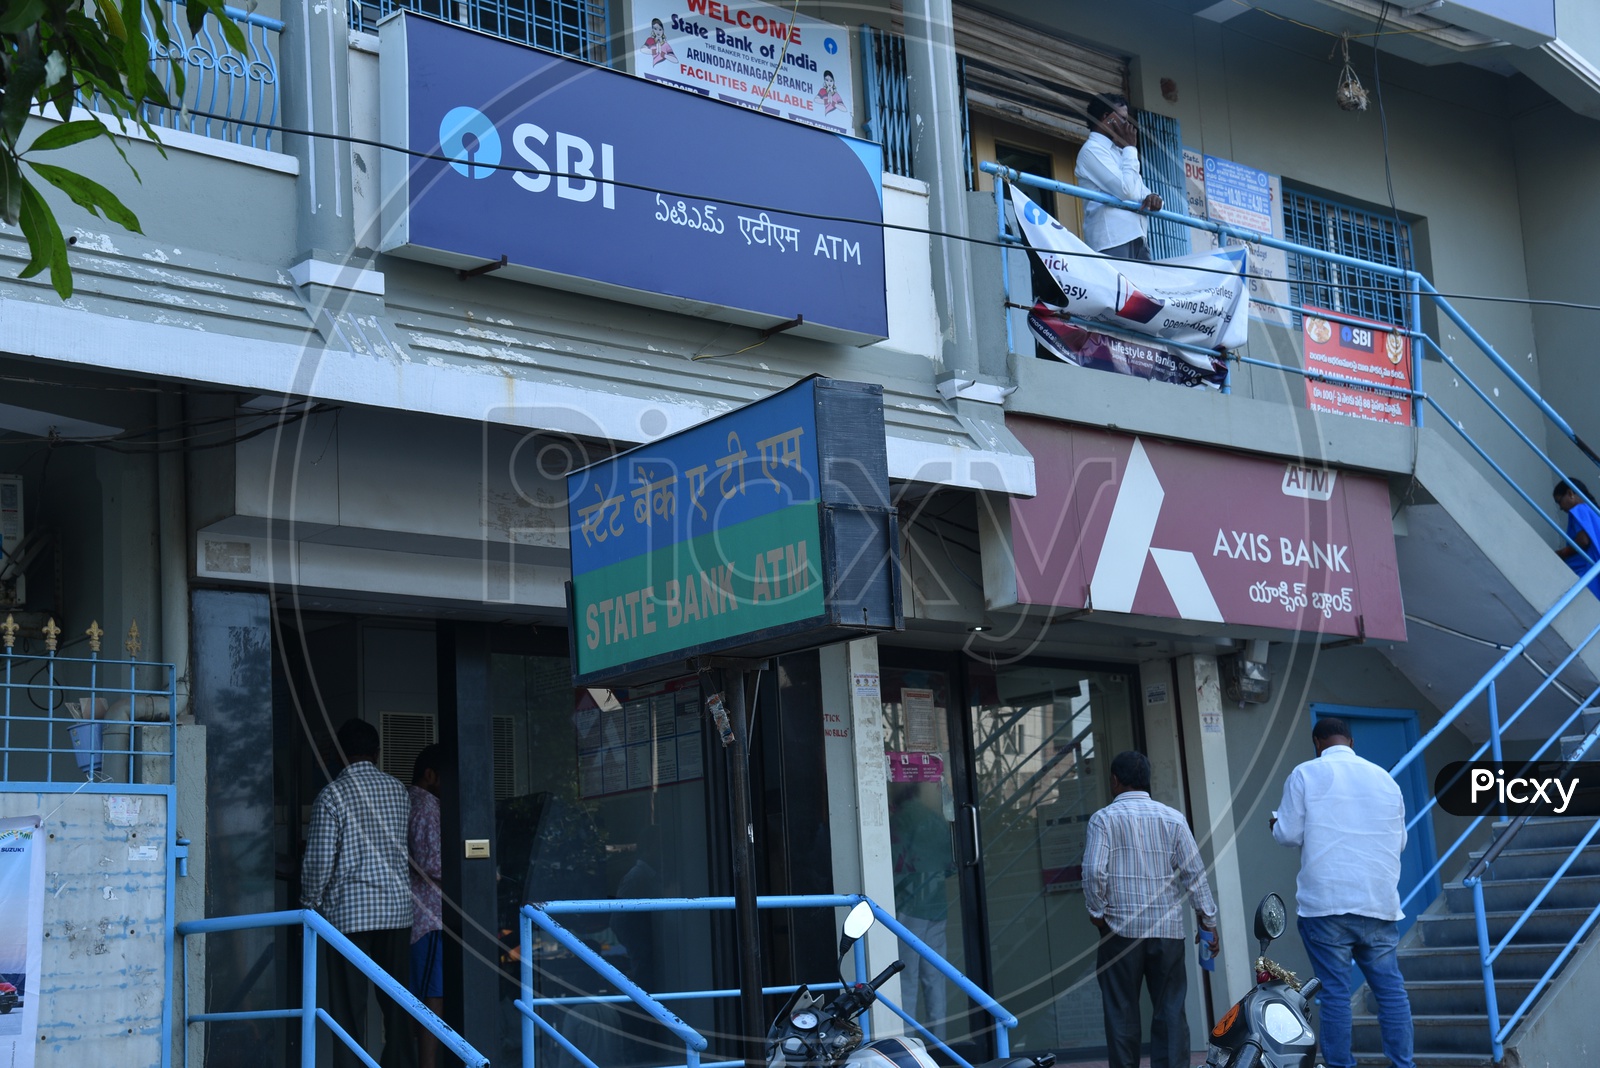 SBI, AXIS bank ATM's